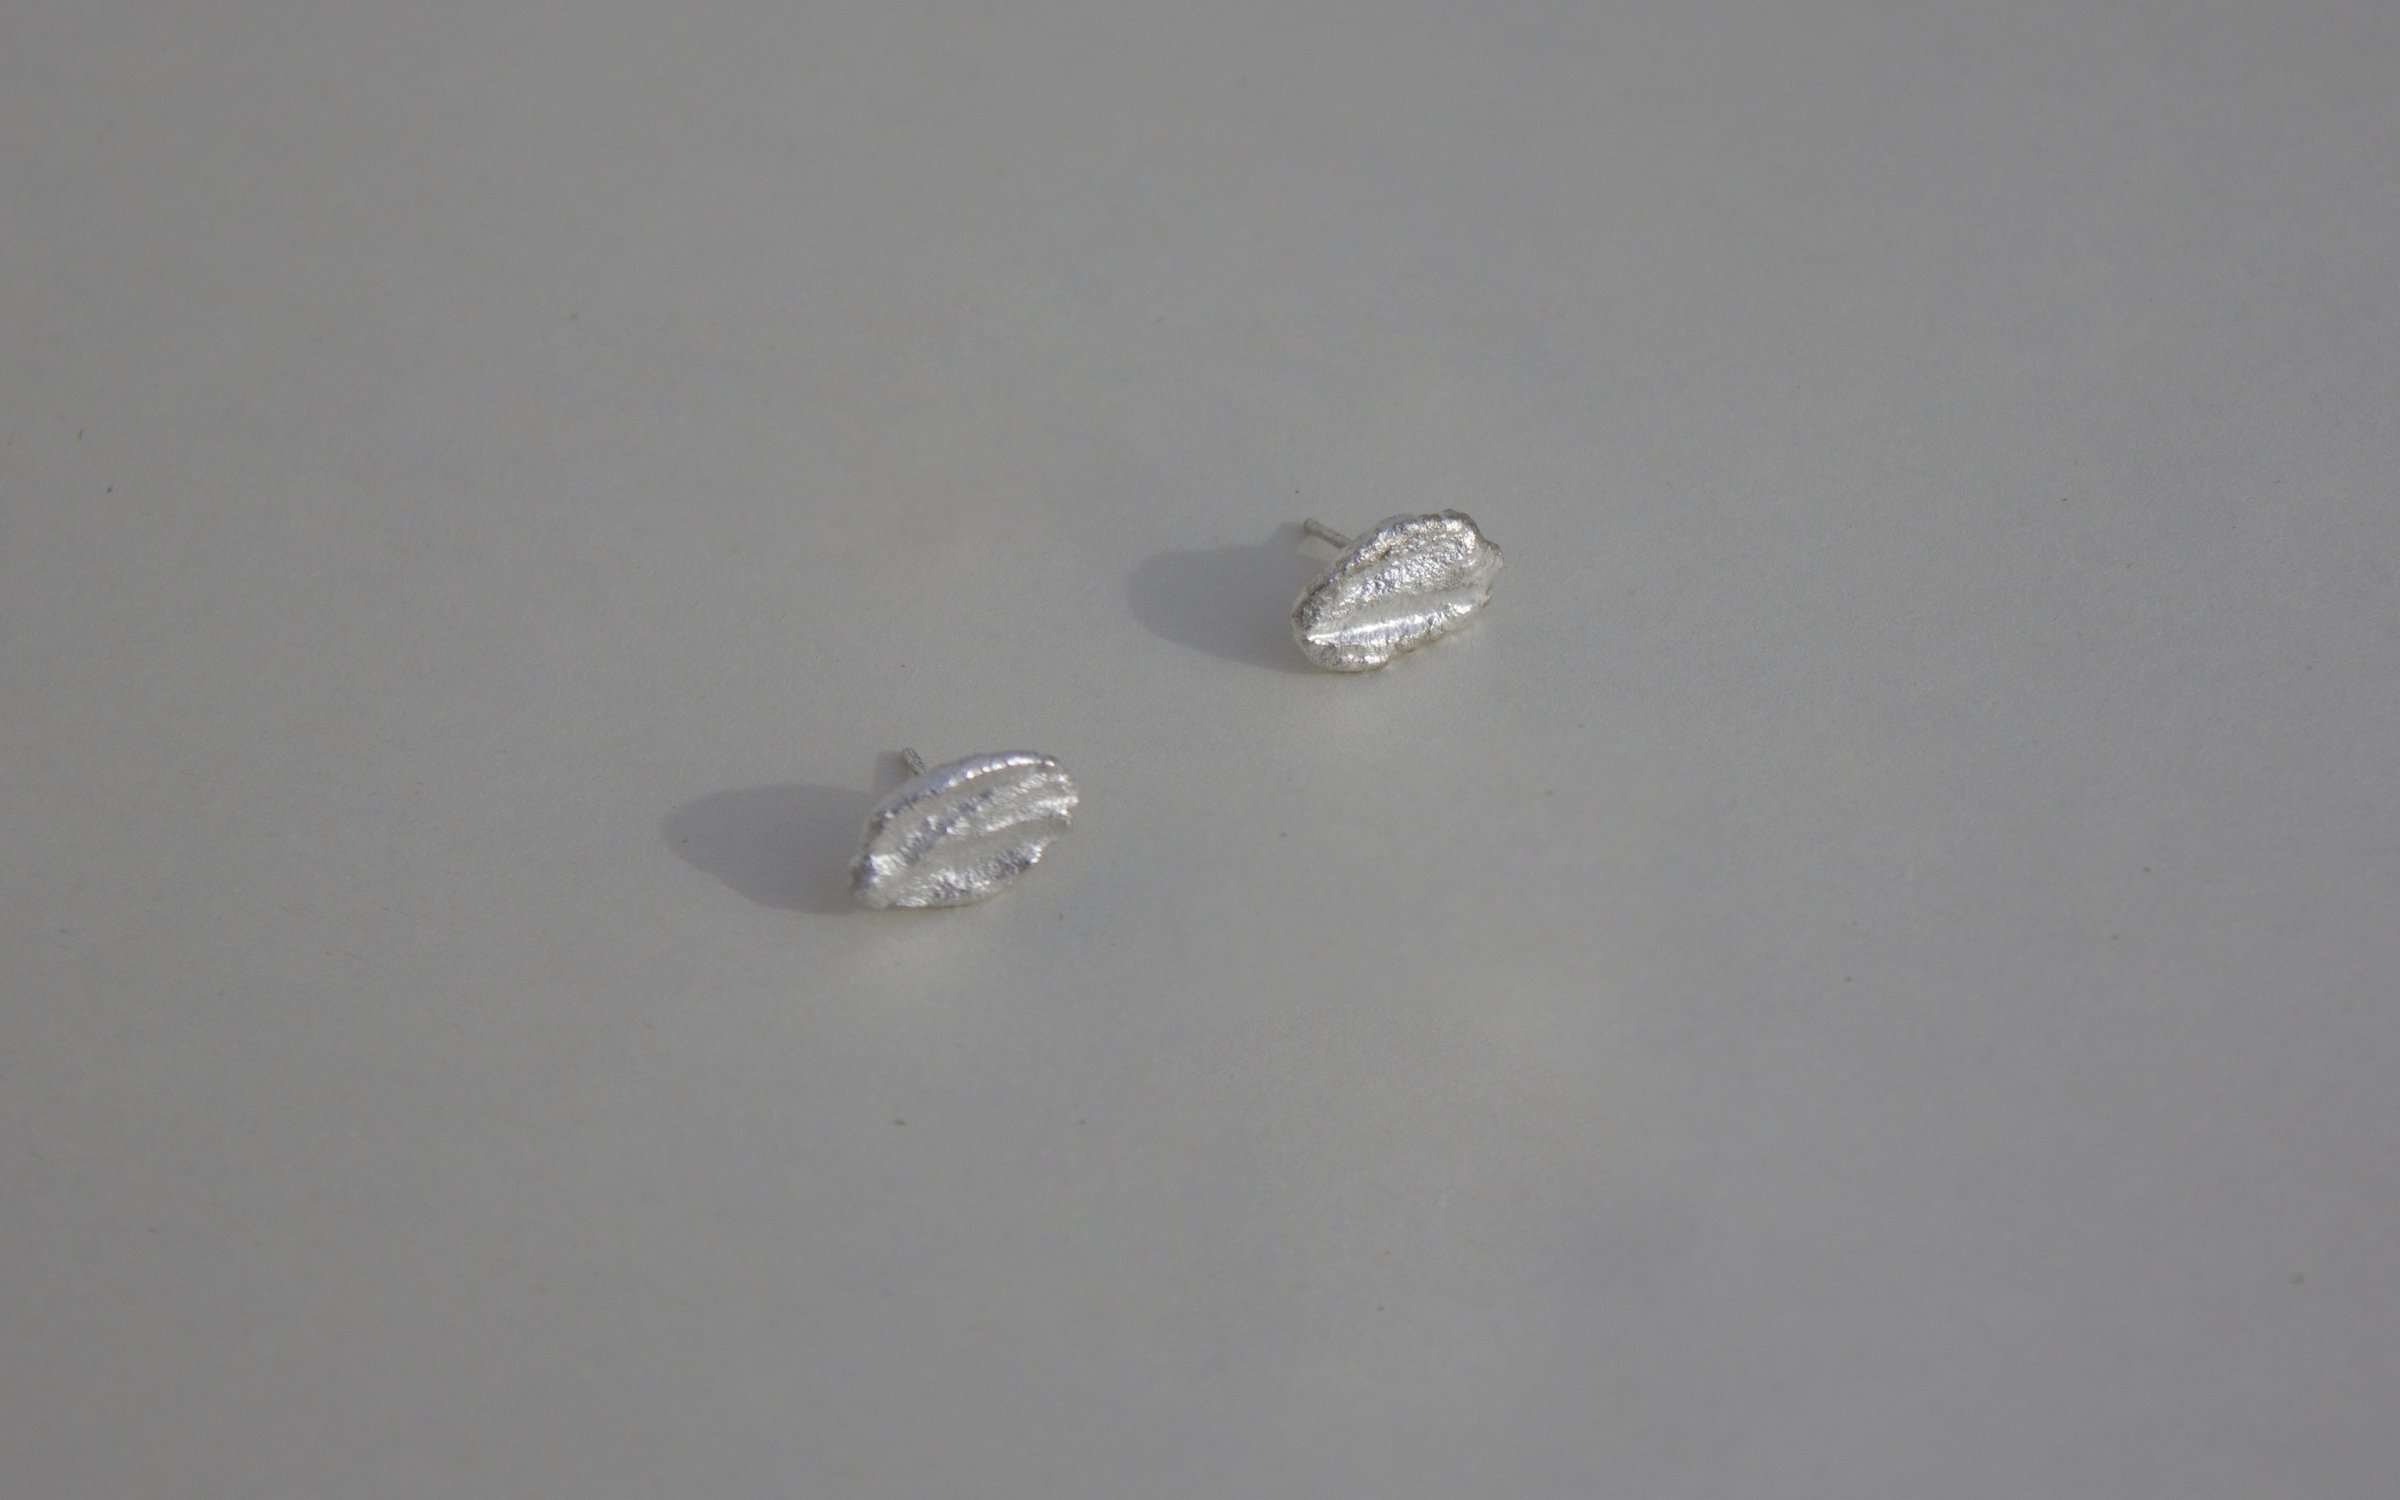 Image of Edition 2. Piece 8. Earrings